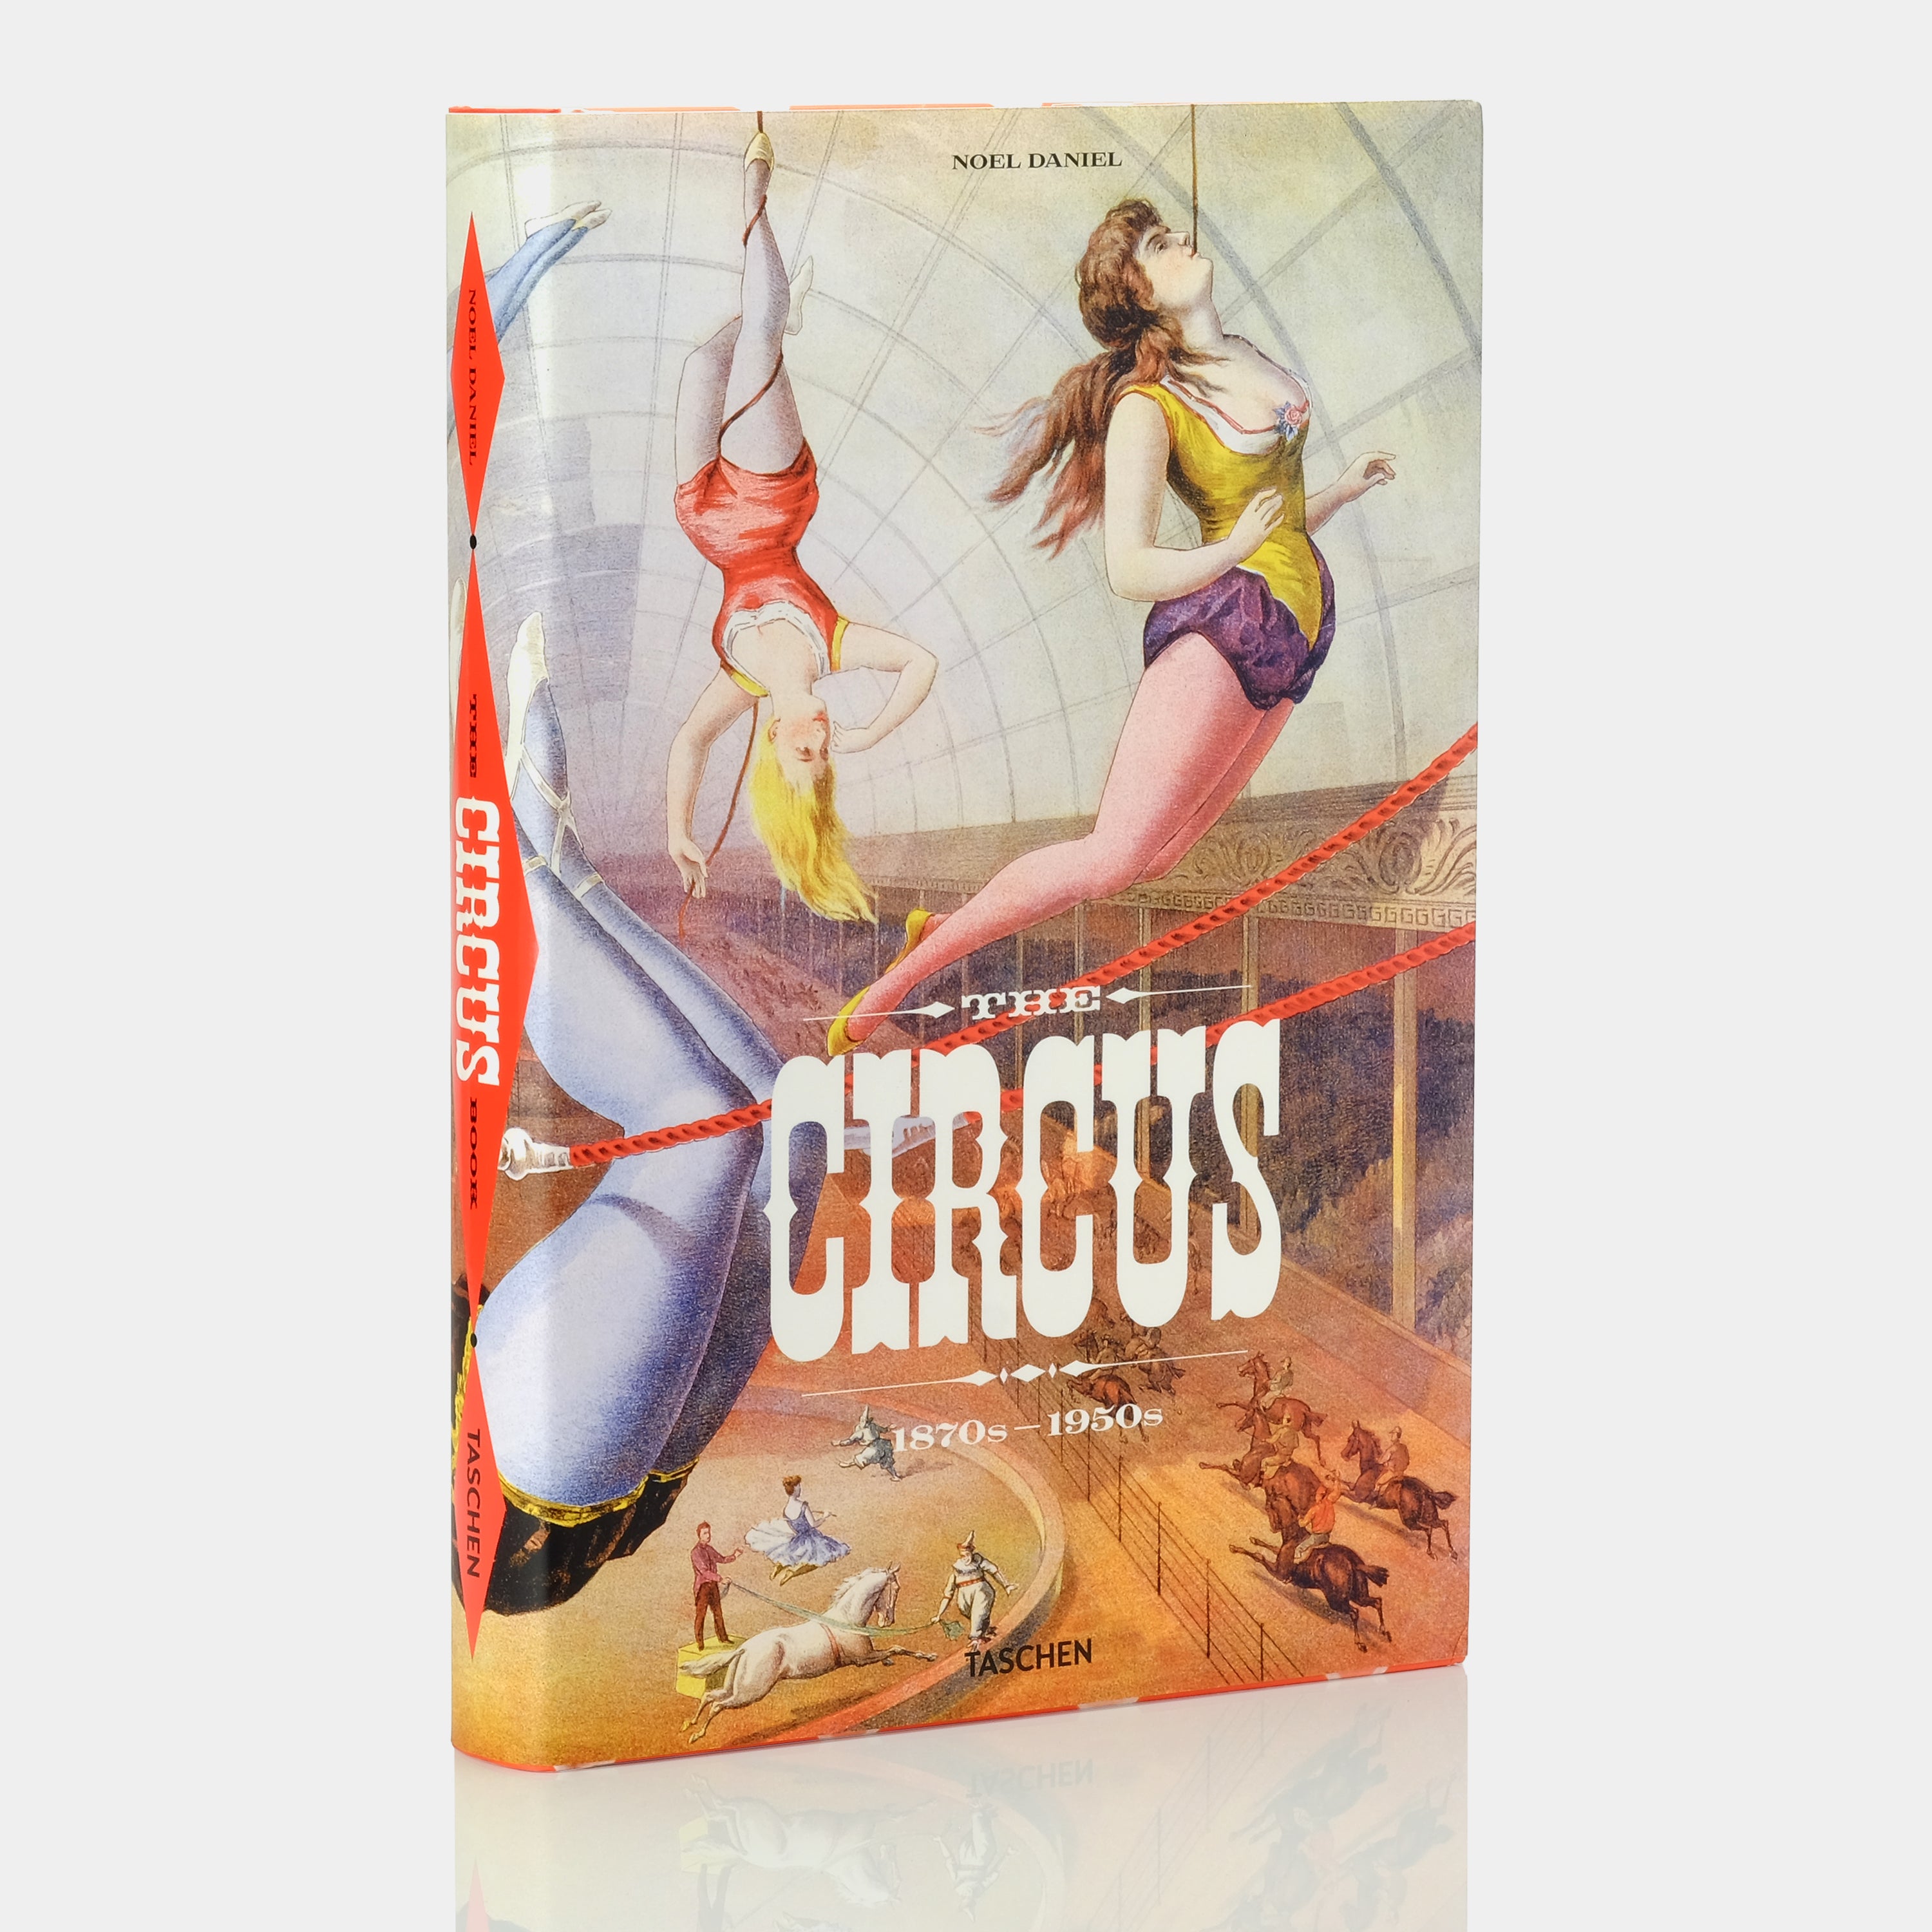 The Circus (1870s–1950s) by Linda Granfield XL Taschen Book